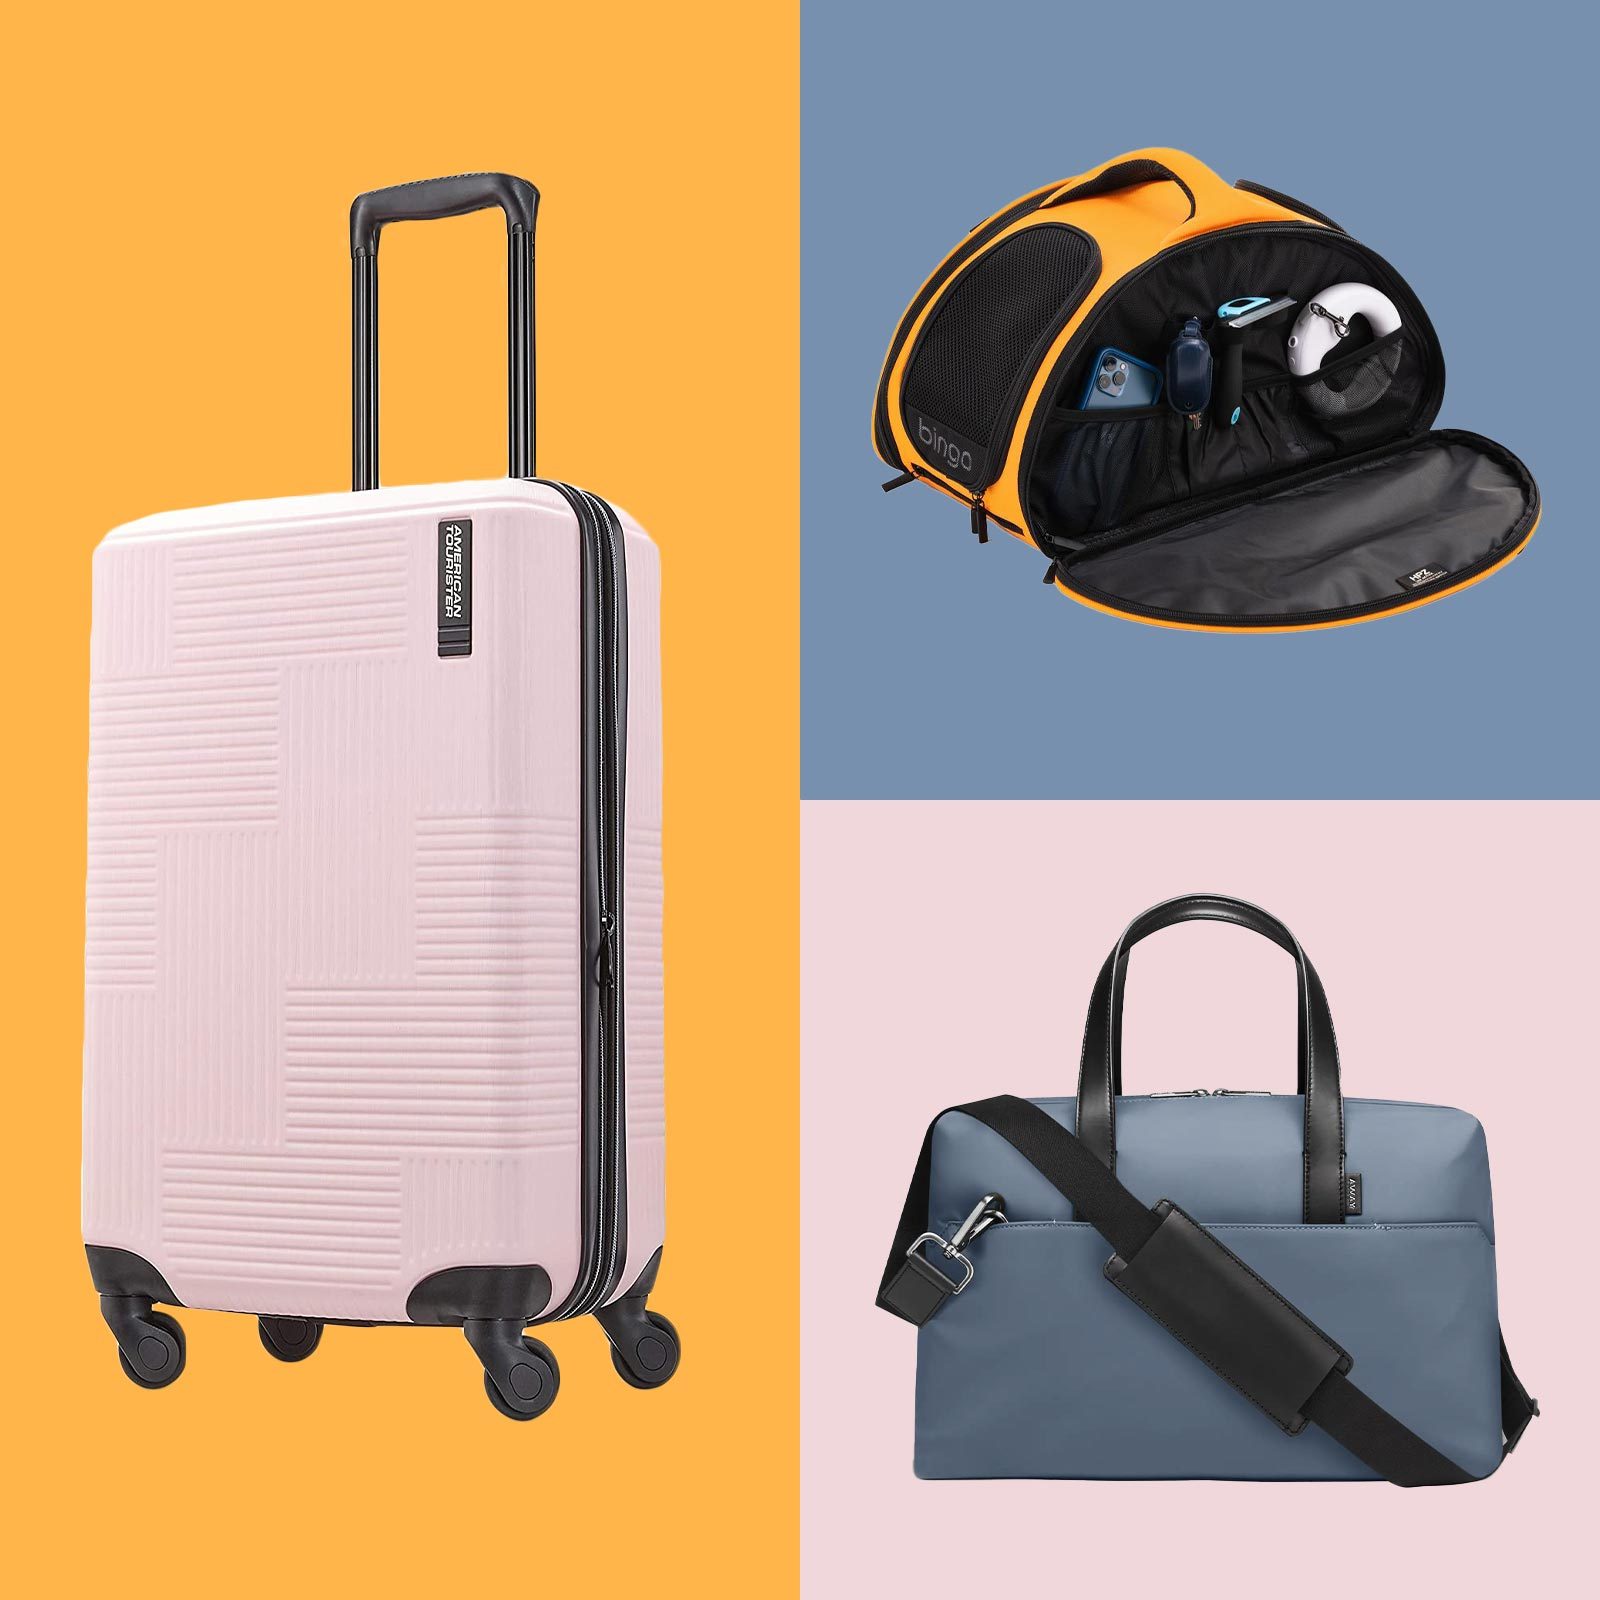 This American Tourister Suitcase Is on Sale Now